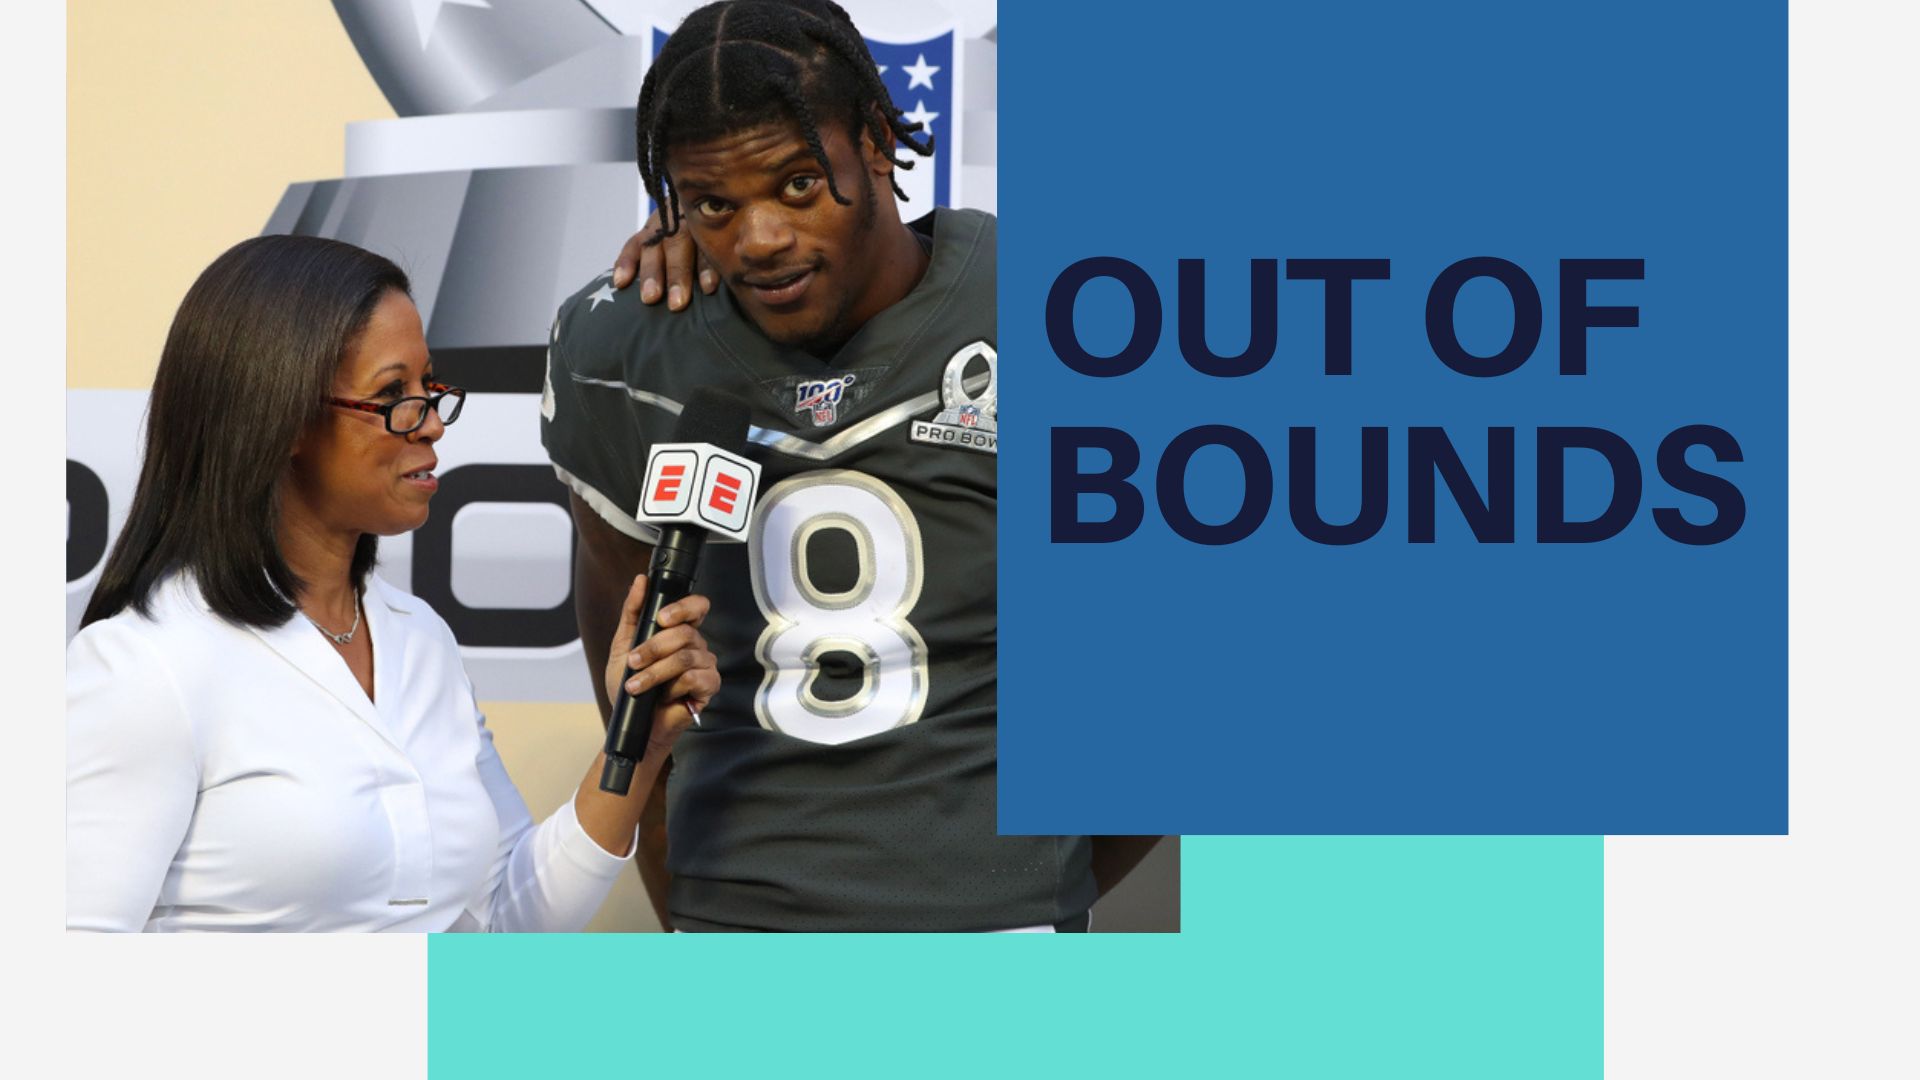 Sports roundup: NFL preview, and the year of the Black quarterback